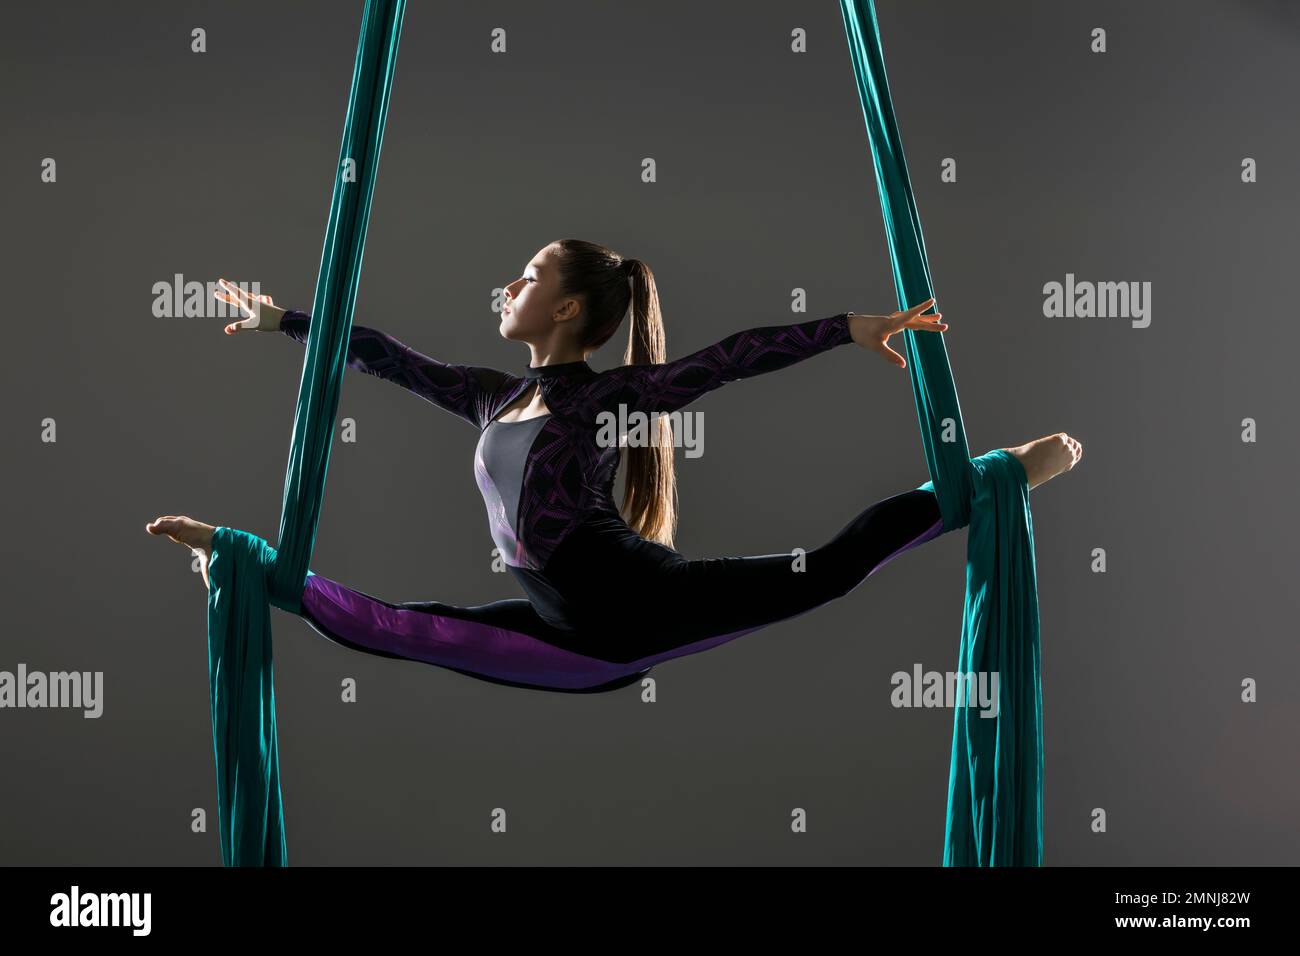 Young acrobat doing splits on aerial silks Stock Photo